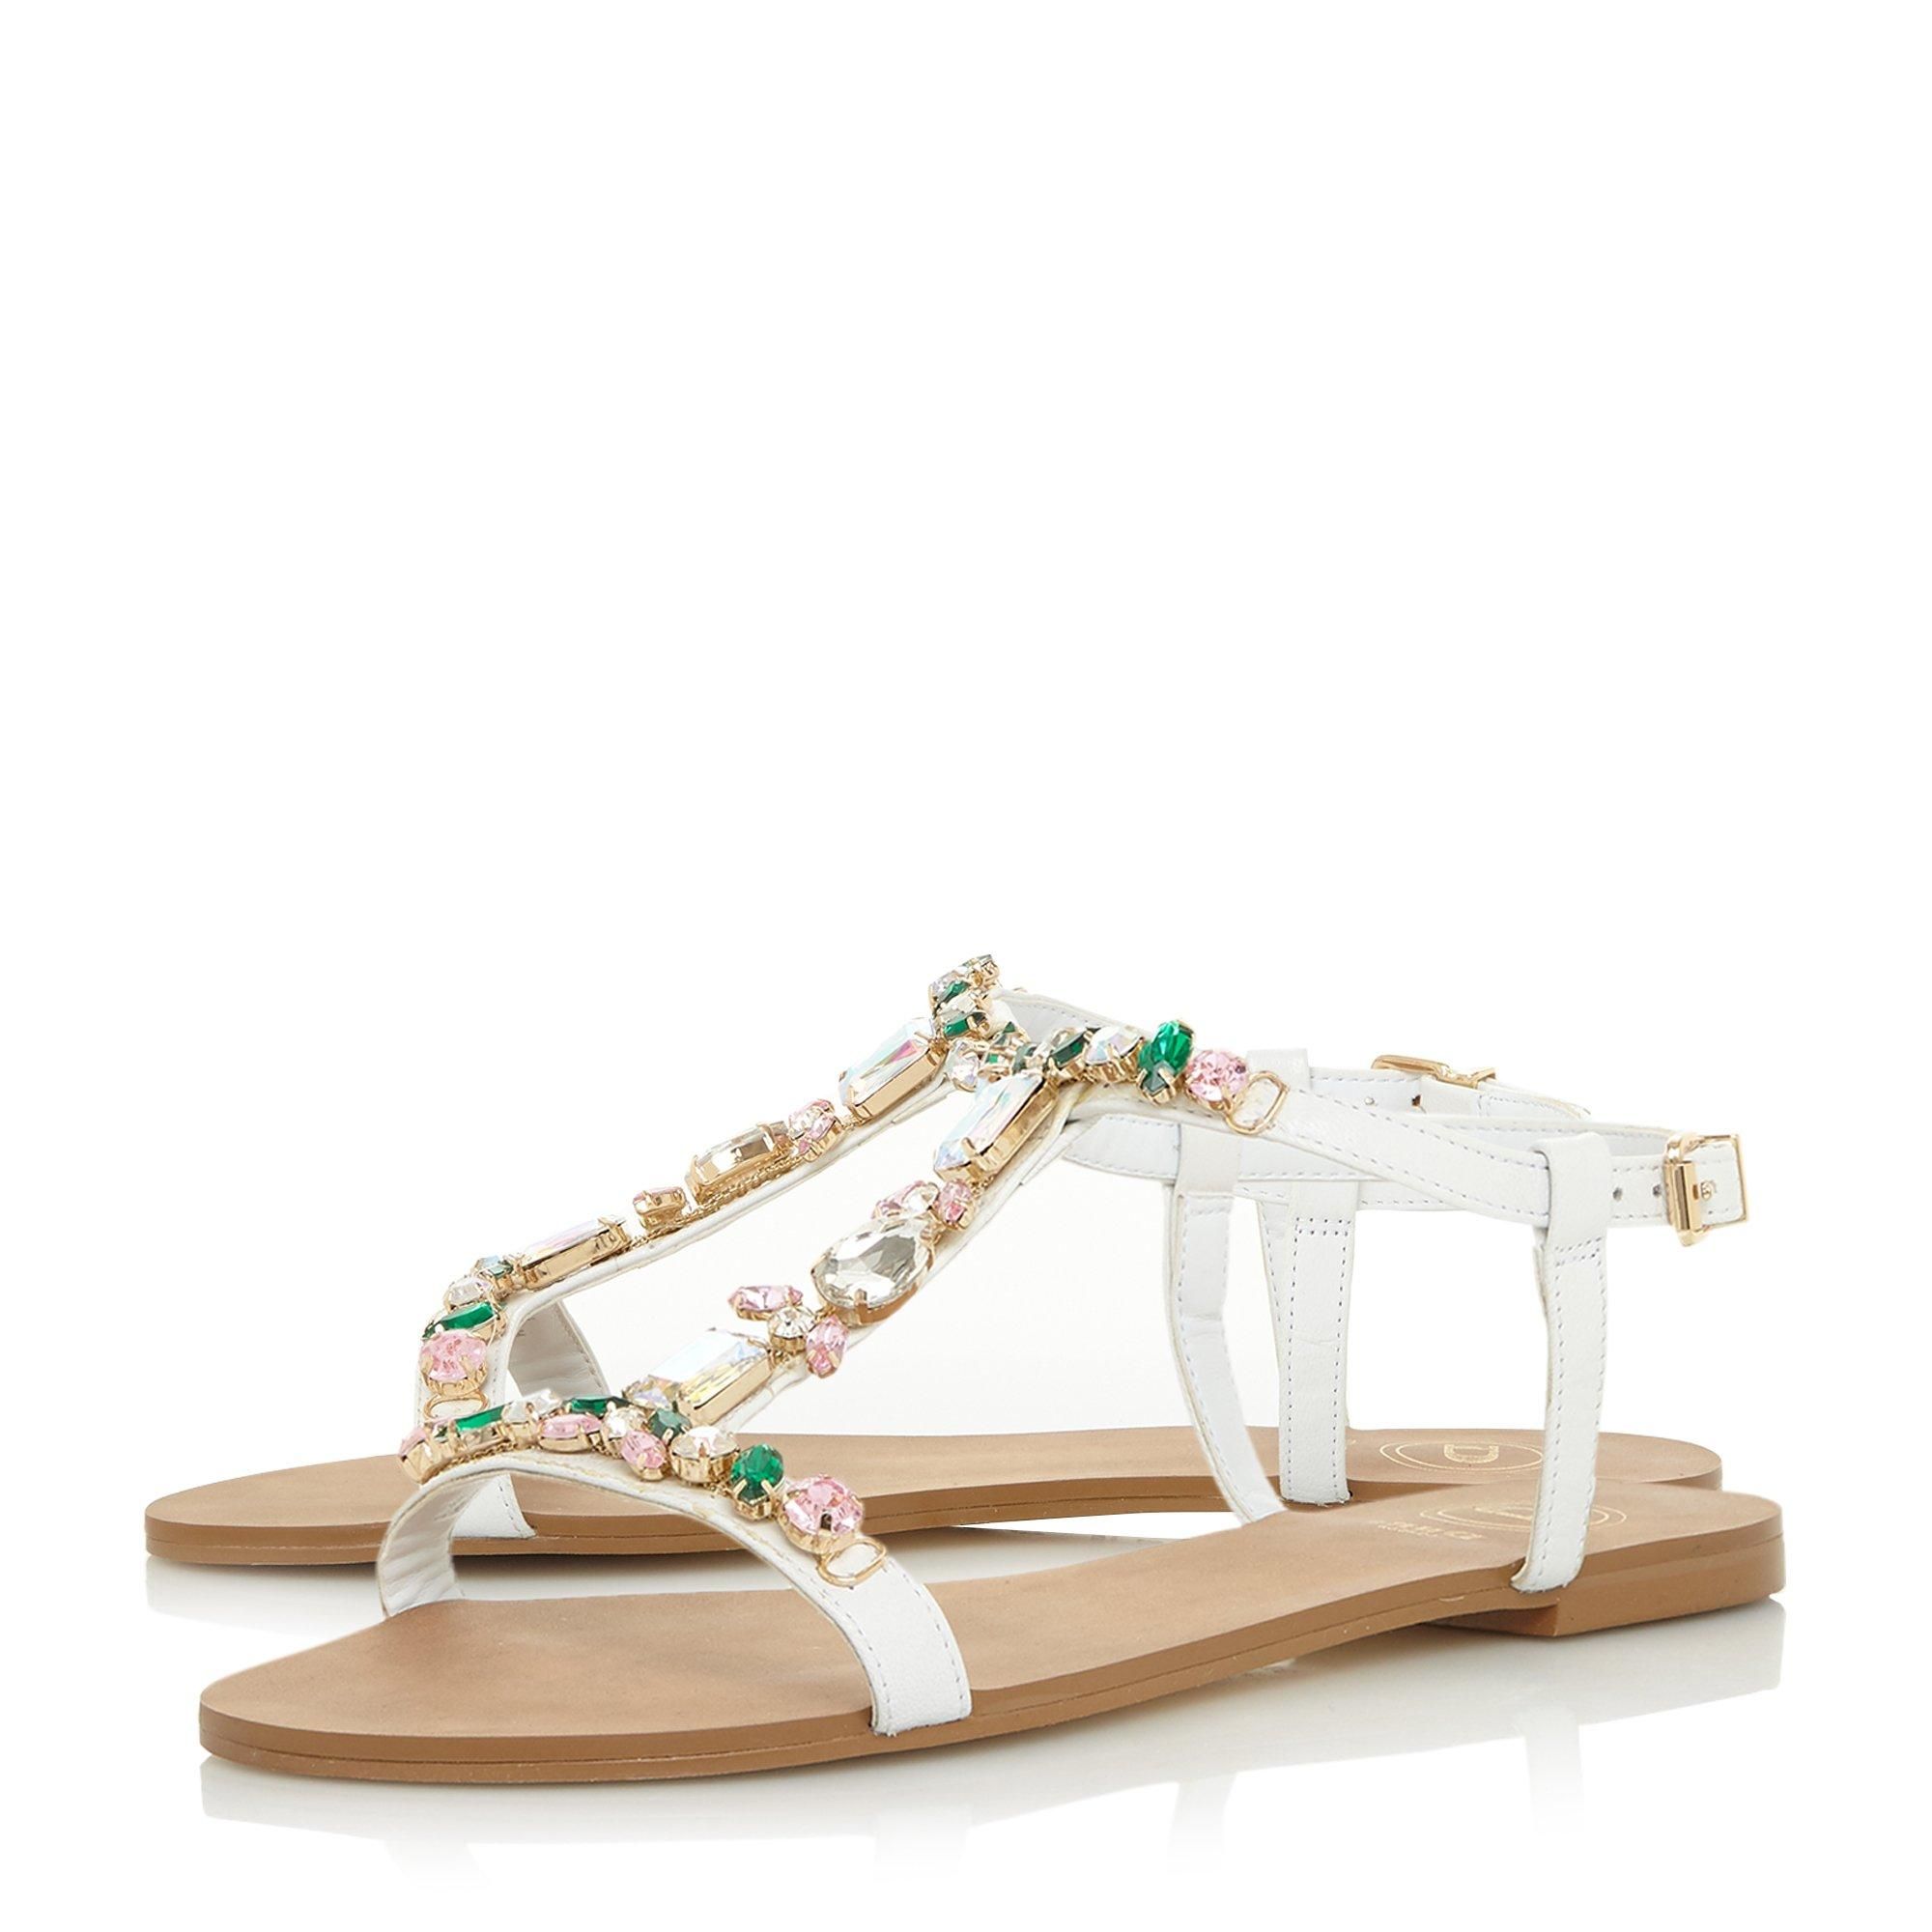 Complete your summer edits with the versatile Natally sandal by Dune. Secured with a gold-toned buckle fastening, it sits on a low block heel. The exquisite stone accents add a sparkling finish and a hint of glamour.